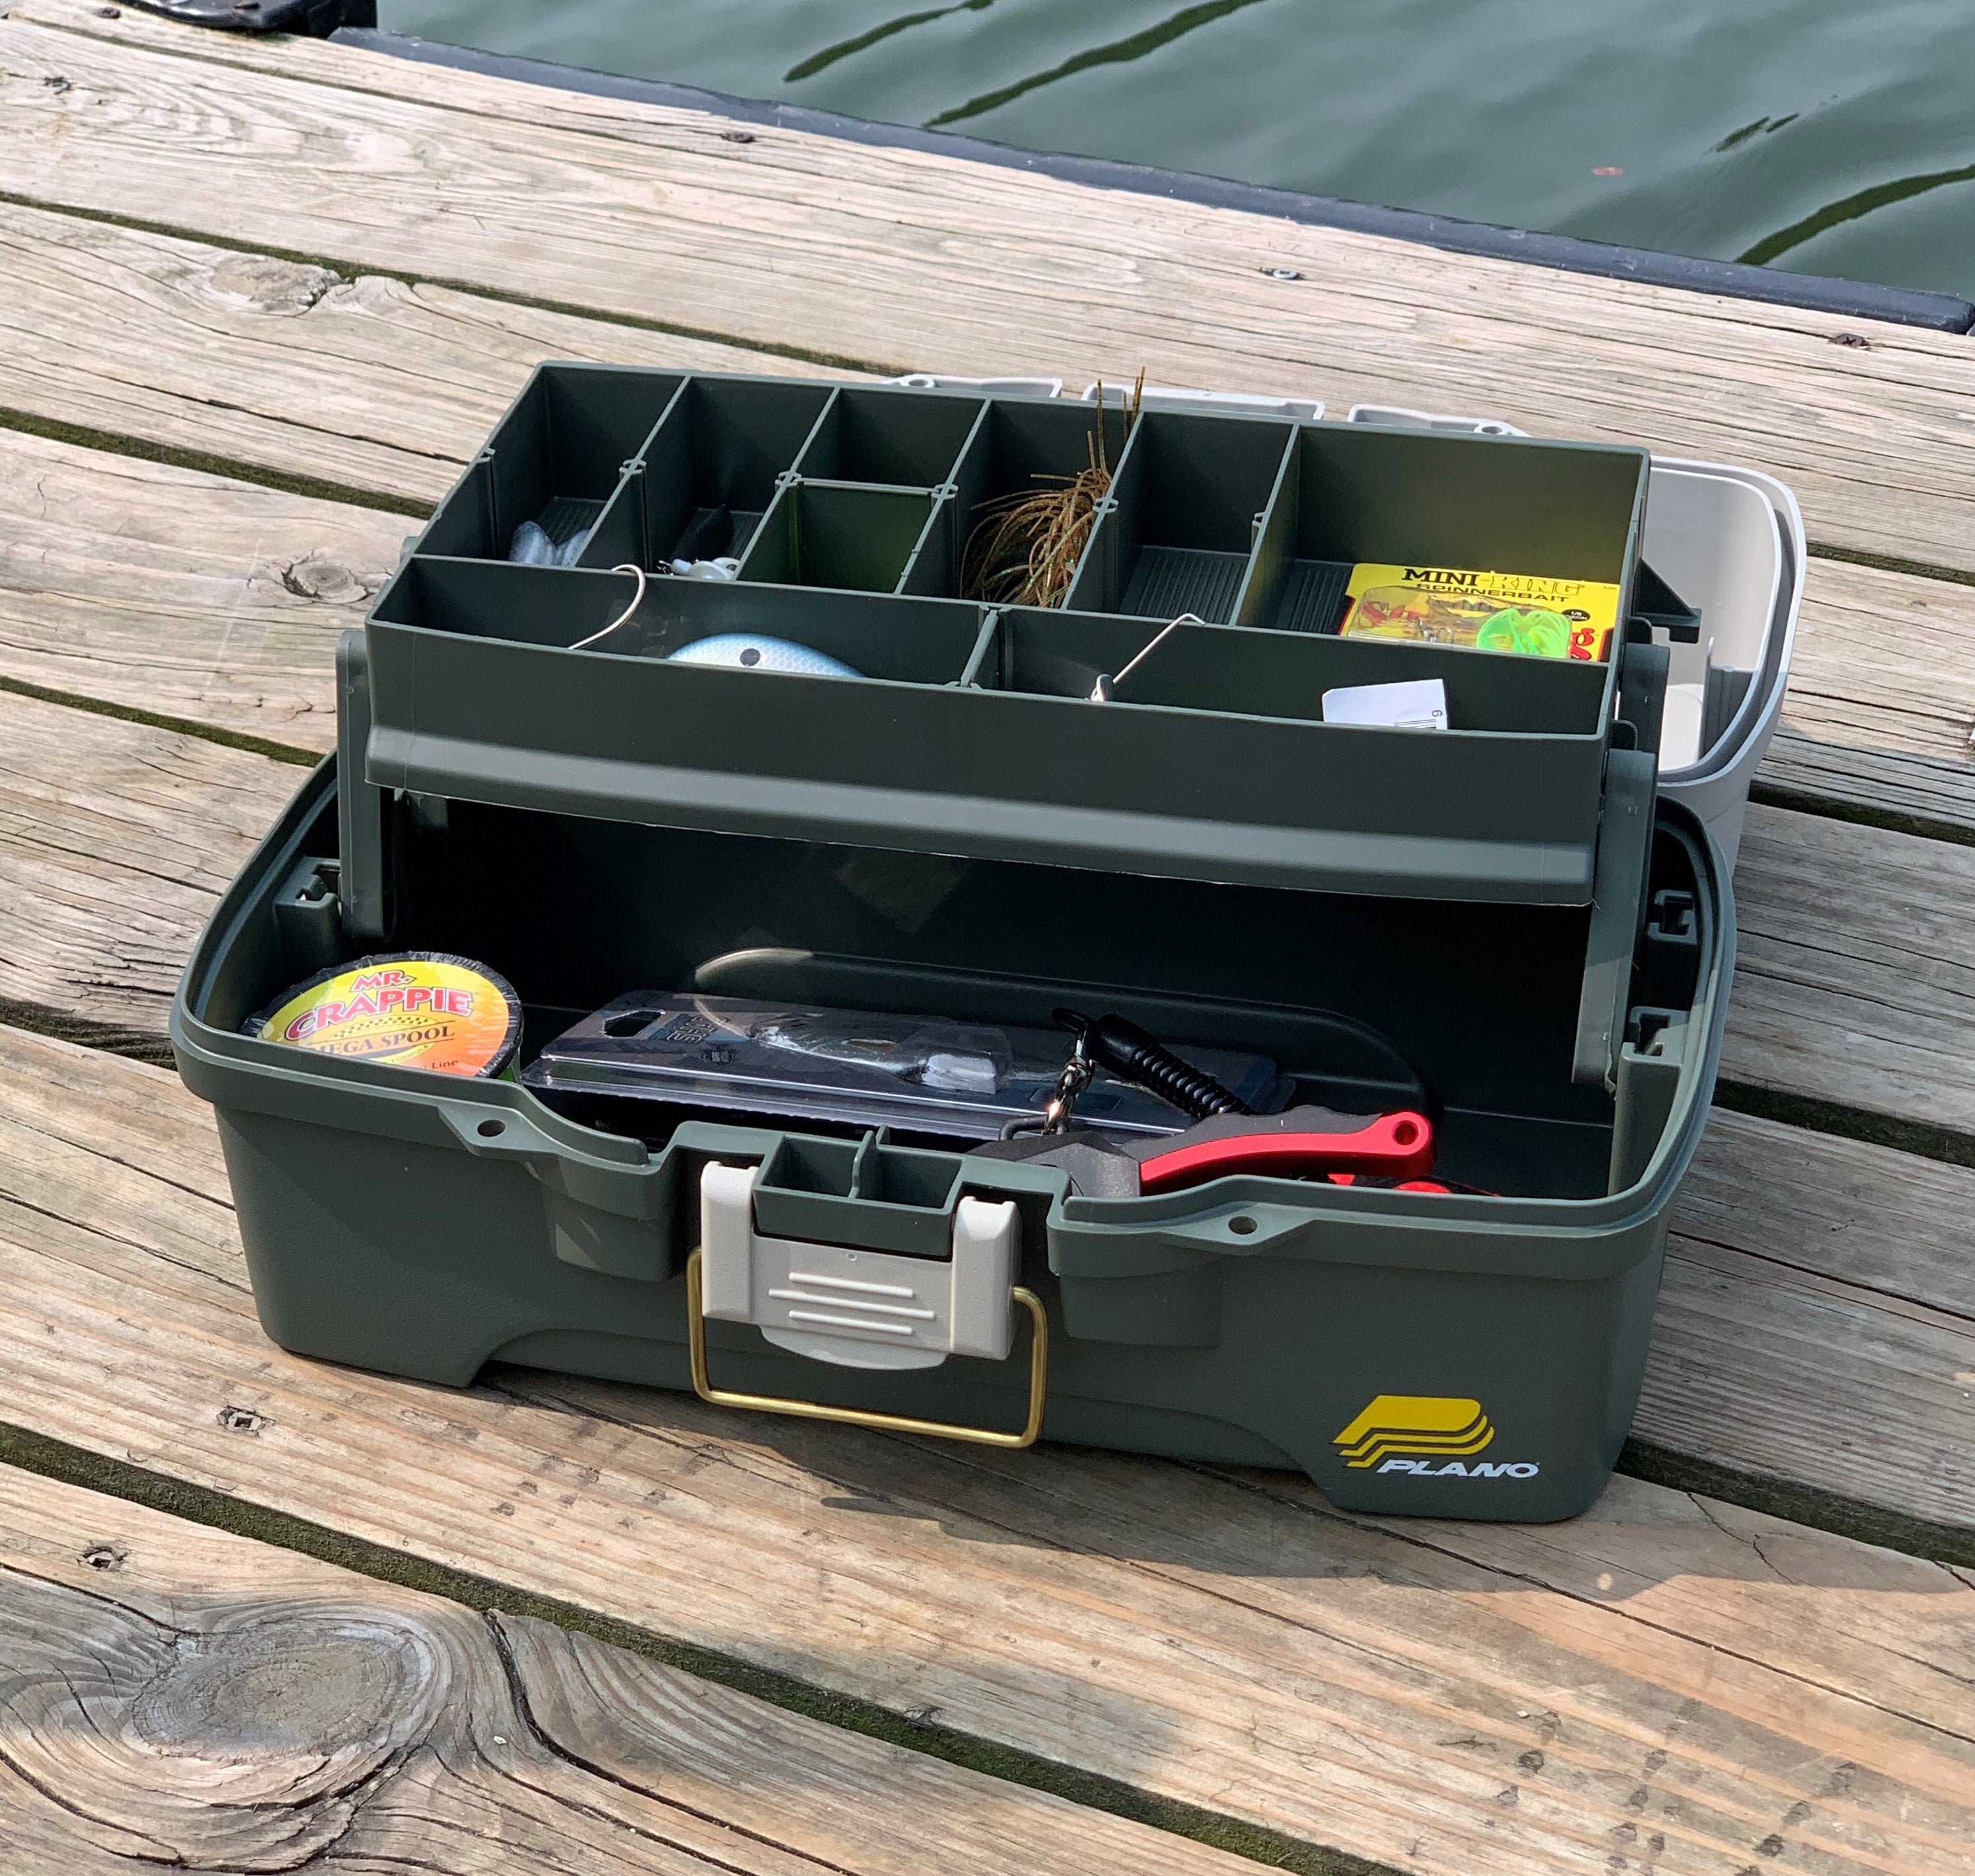 Plano 6201 One-Tray Tackle Box, Bait Storage, Extending